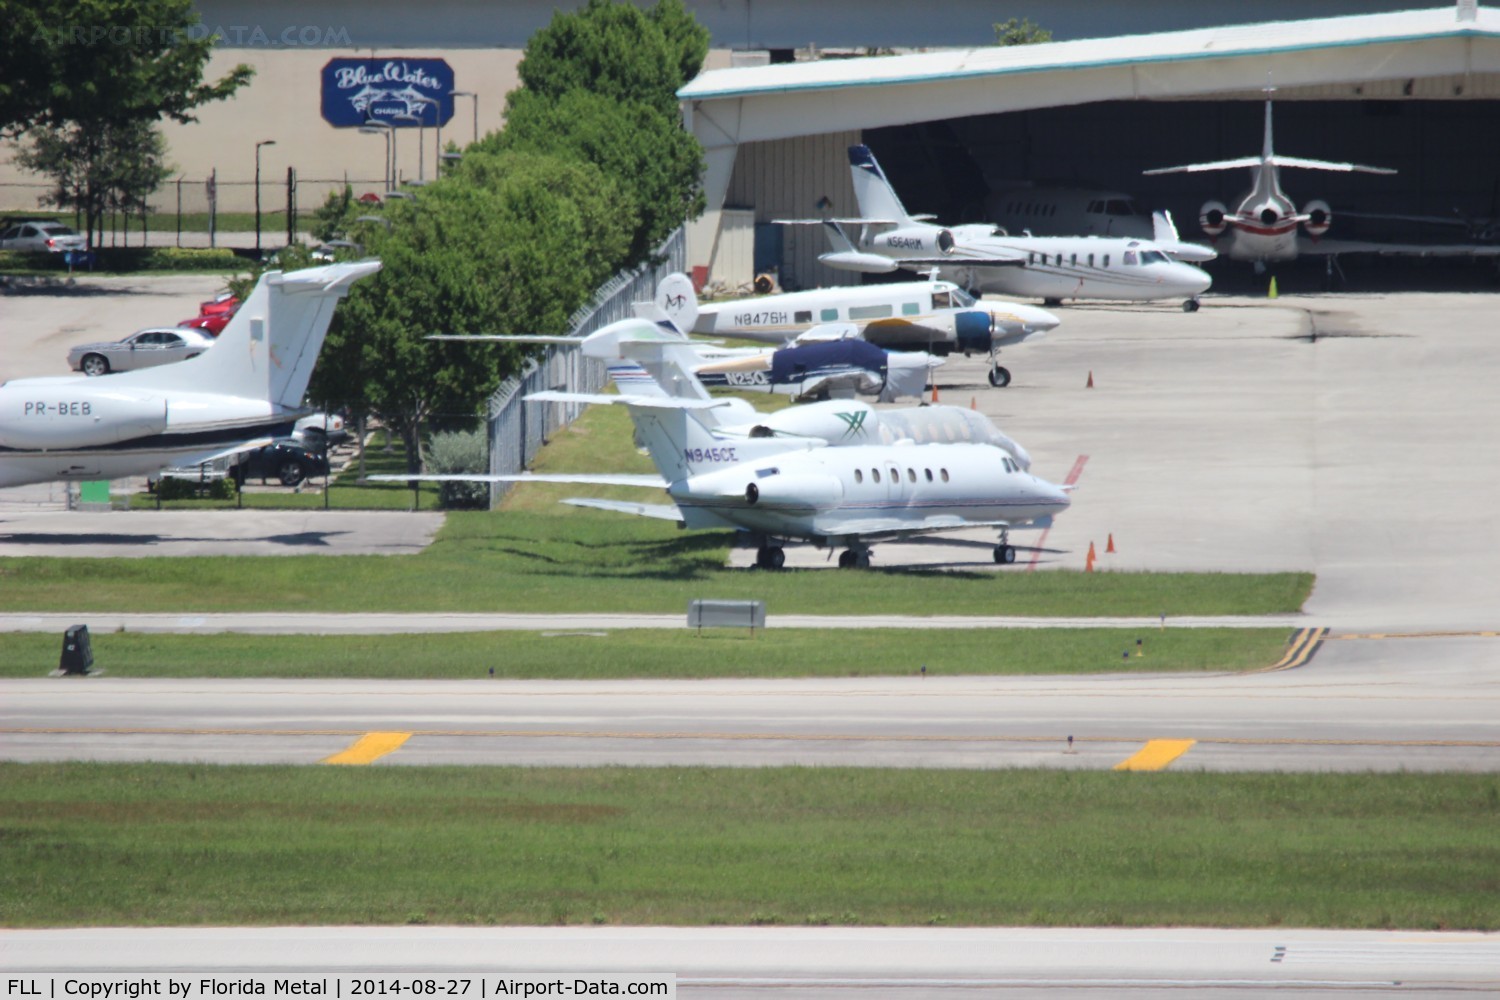 Fort Lauderdale/hollywood International Airport (FLL) - One of Ft Lauderdale's 5 FBOs